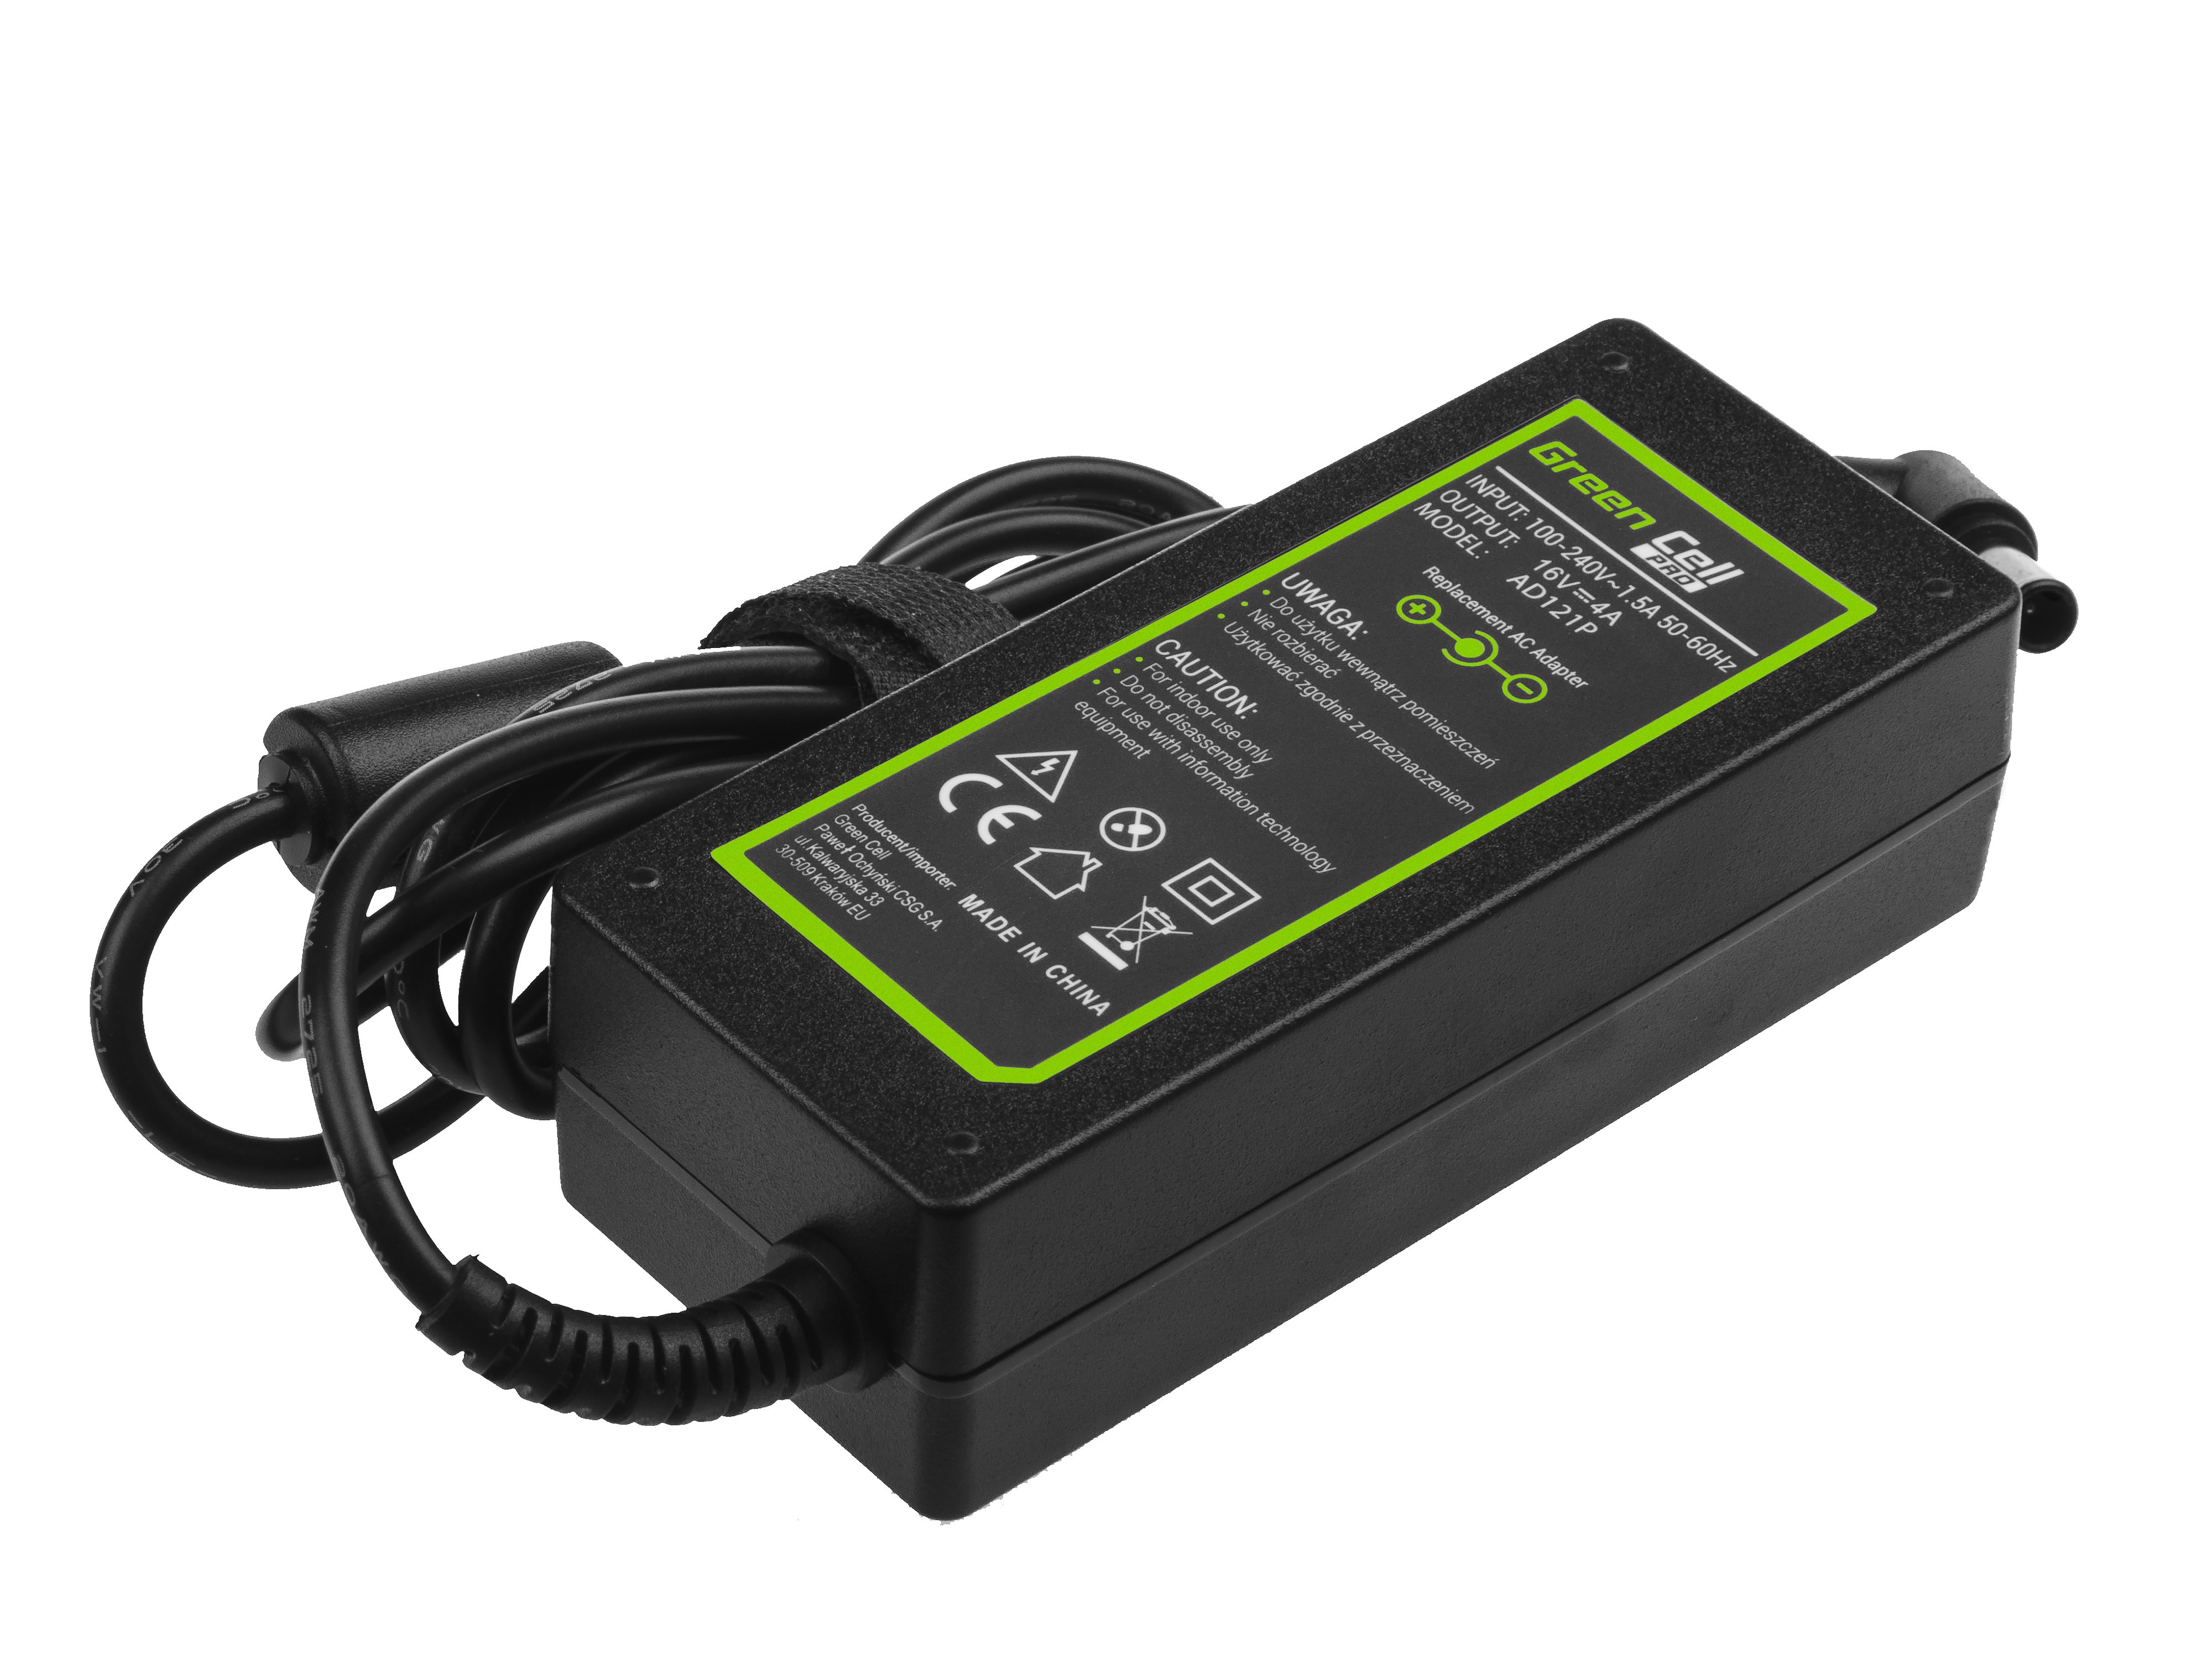 PRO Oplader  AC Adapter voor Sony Vaio PCG-R505 VGN-B VGN-S VGN-S360 VGN-T VGN-UX VGN-UX380N 16V 4A 64W.